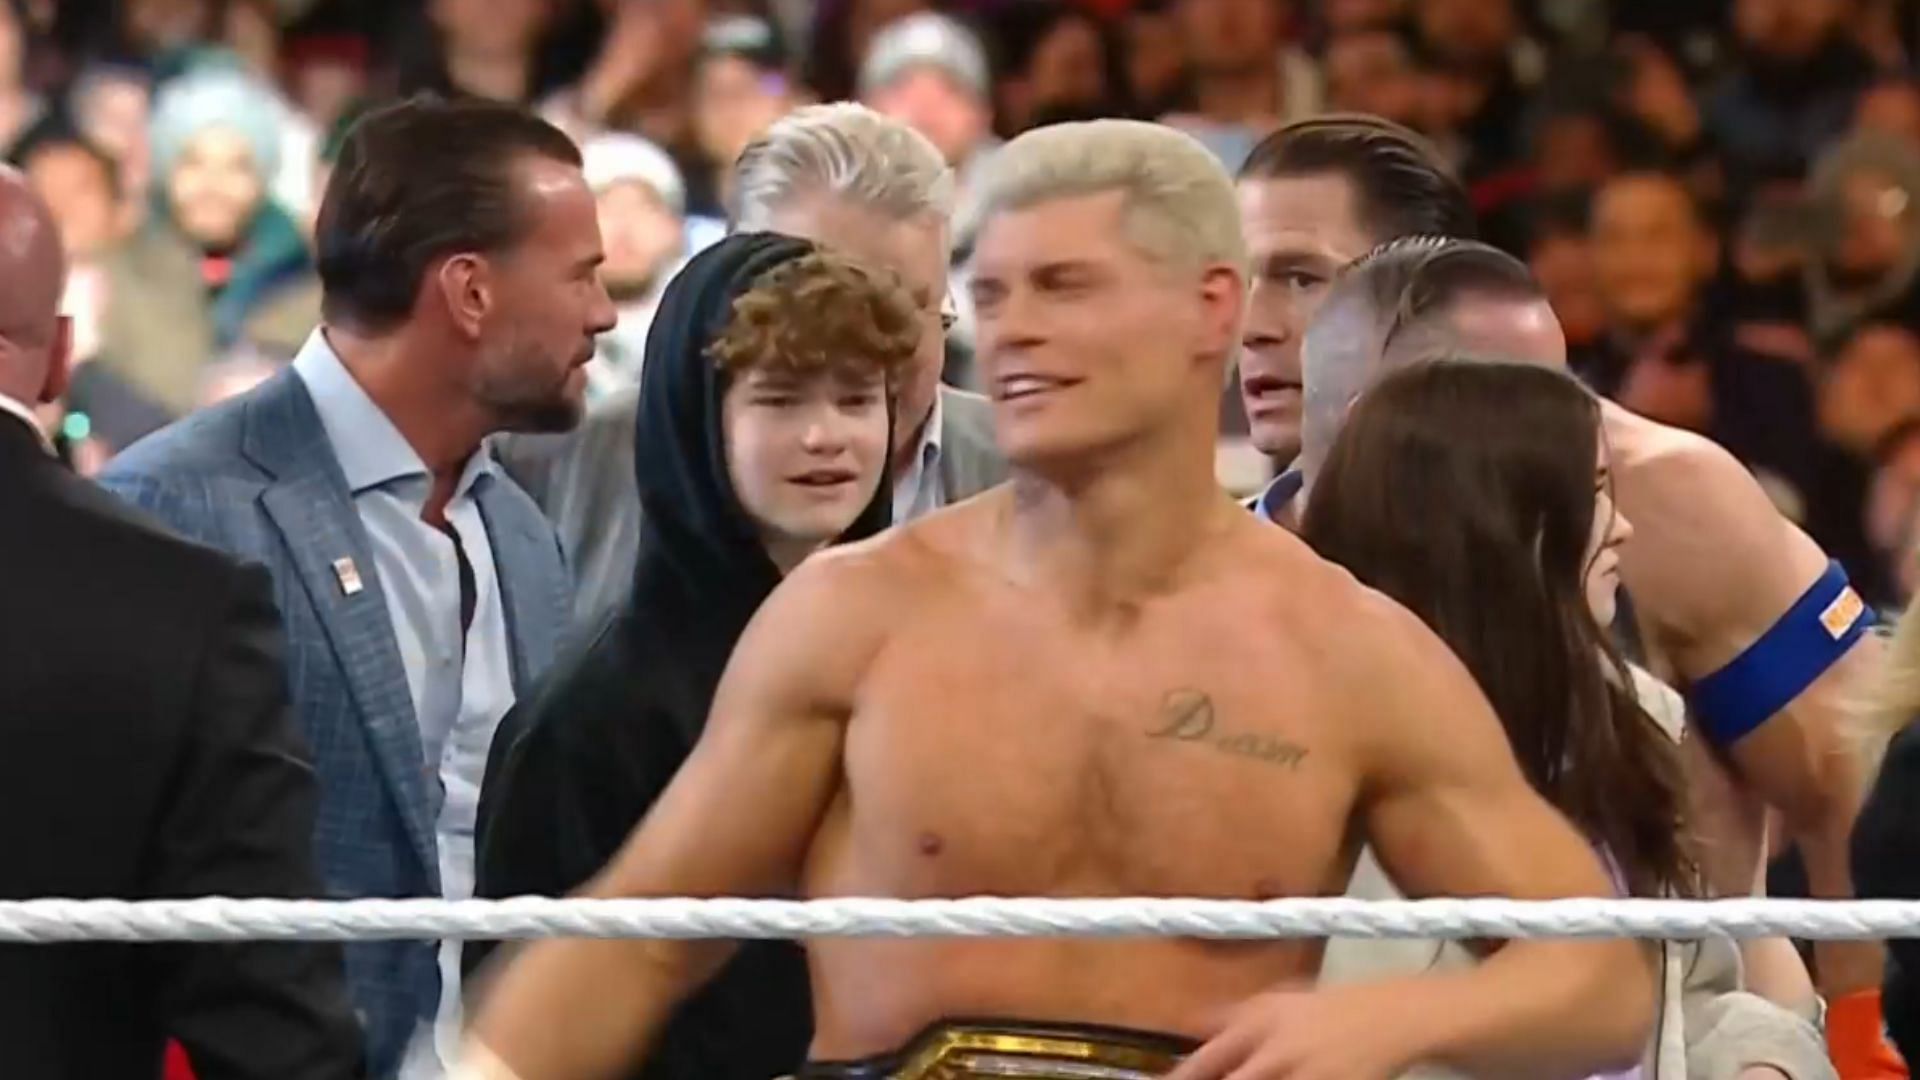 CM Punk and John Cena were amongst the stars who celebrated with Cody Rhodes.